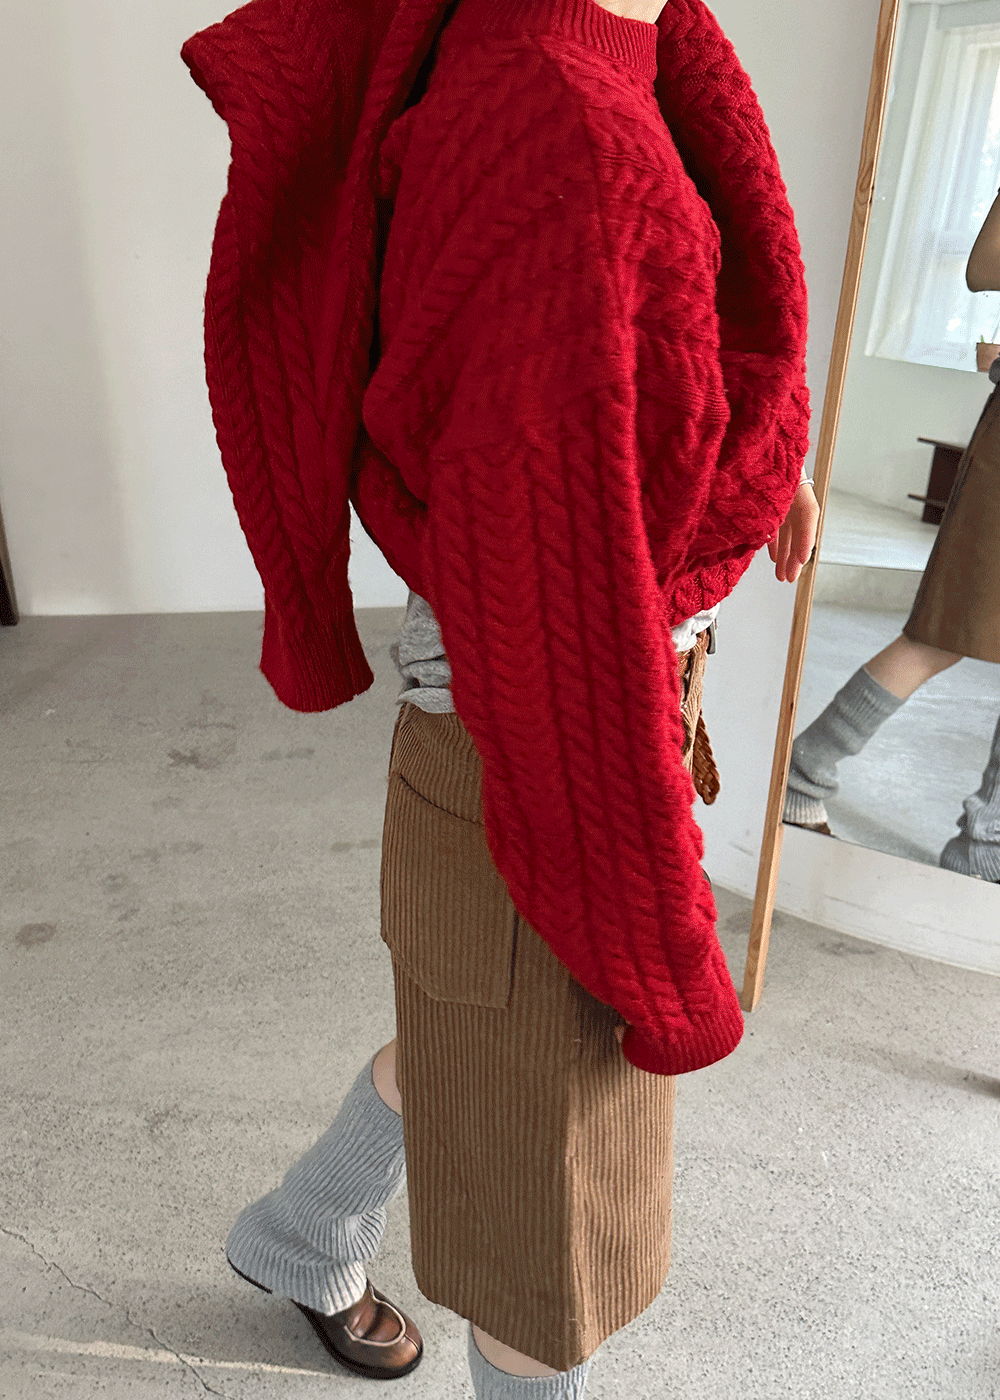 Mario cable knit